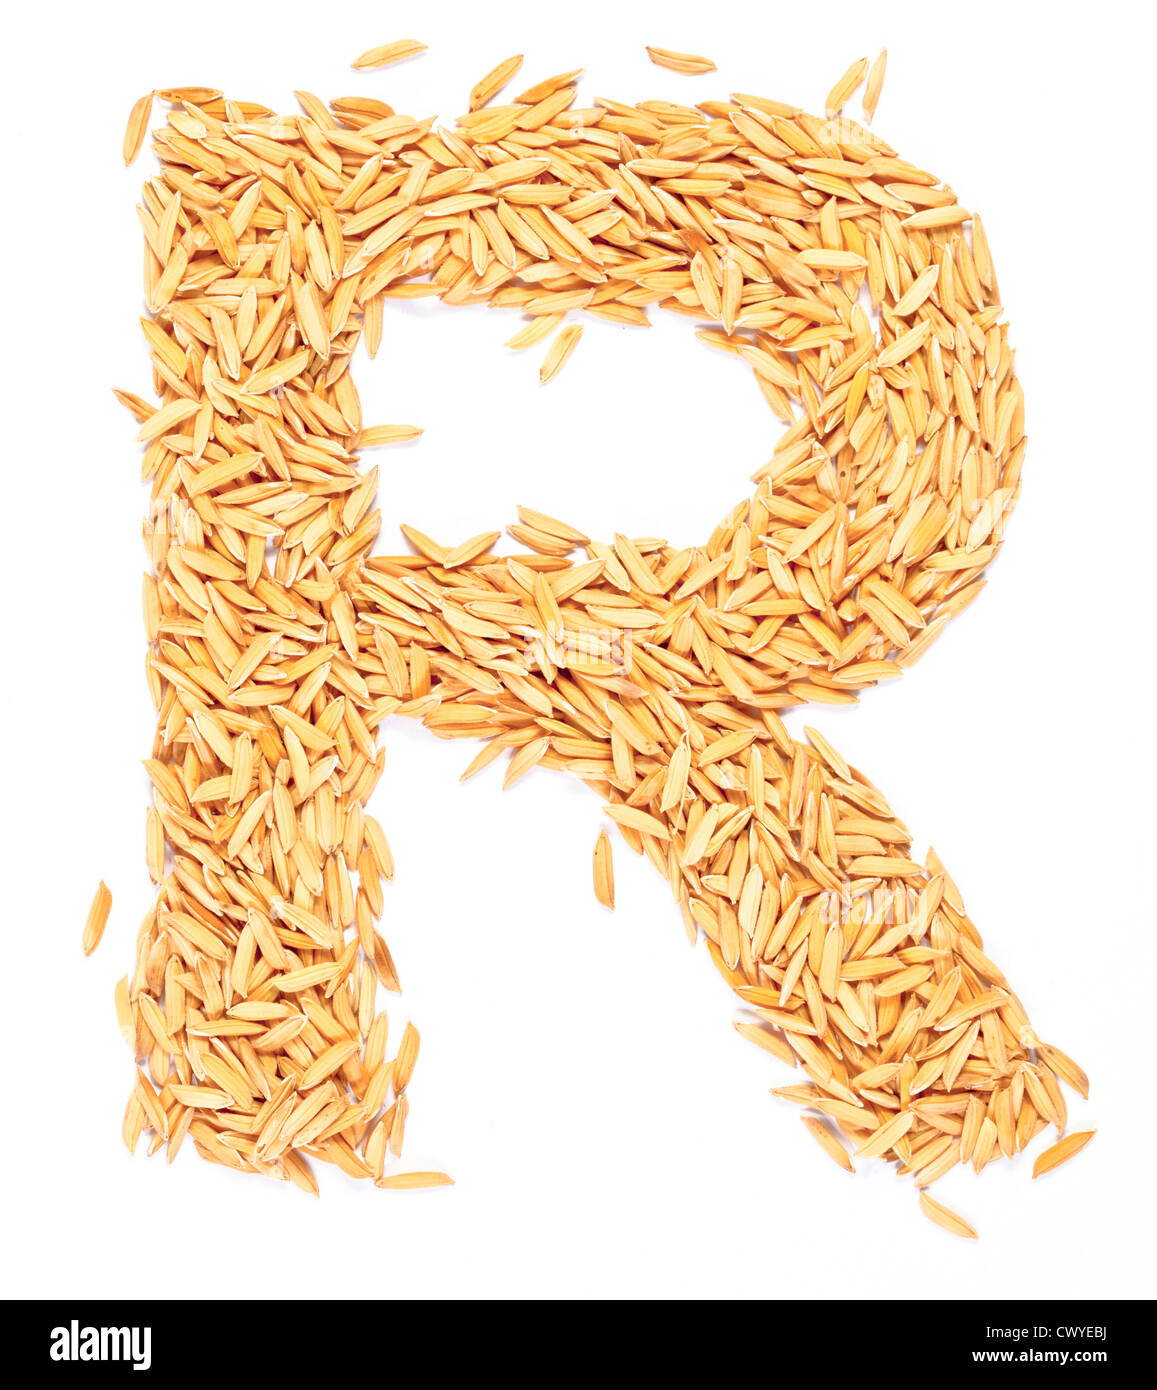 r, alphabet,Letter from Paddy rice on white Stock Photo